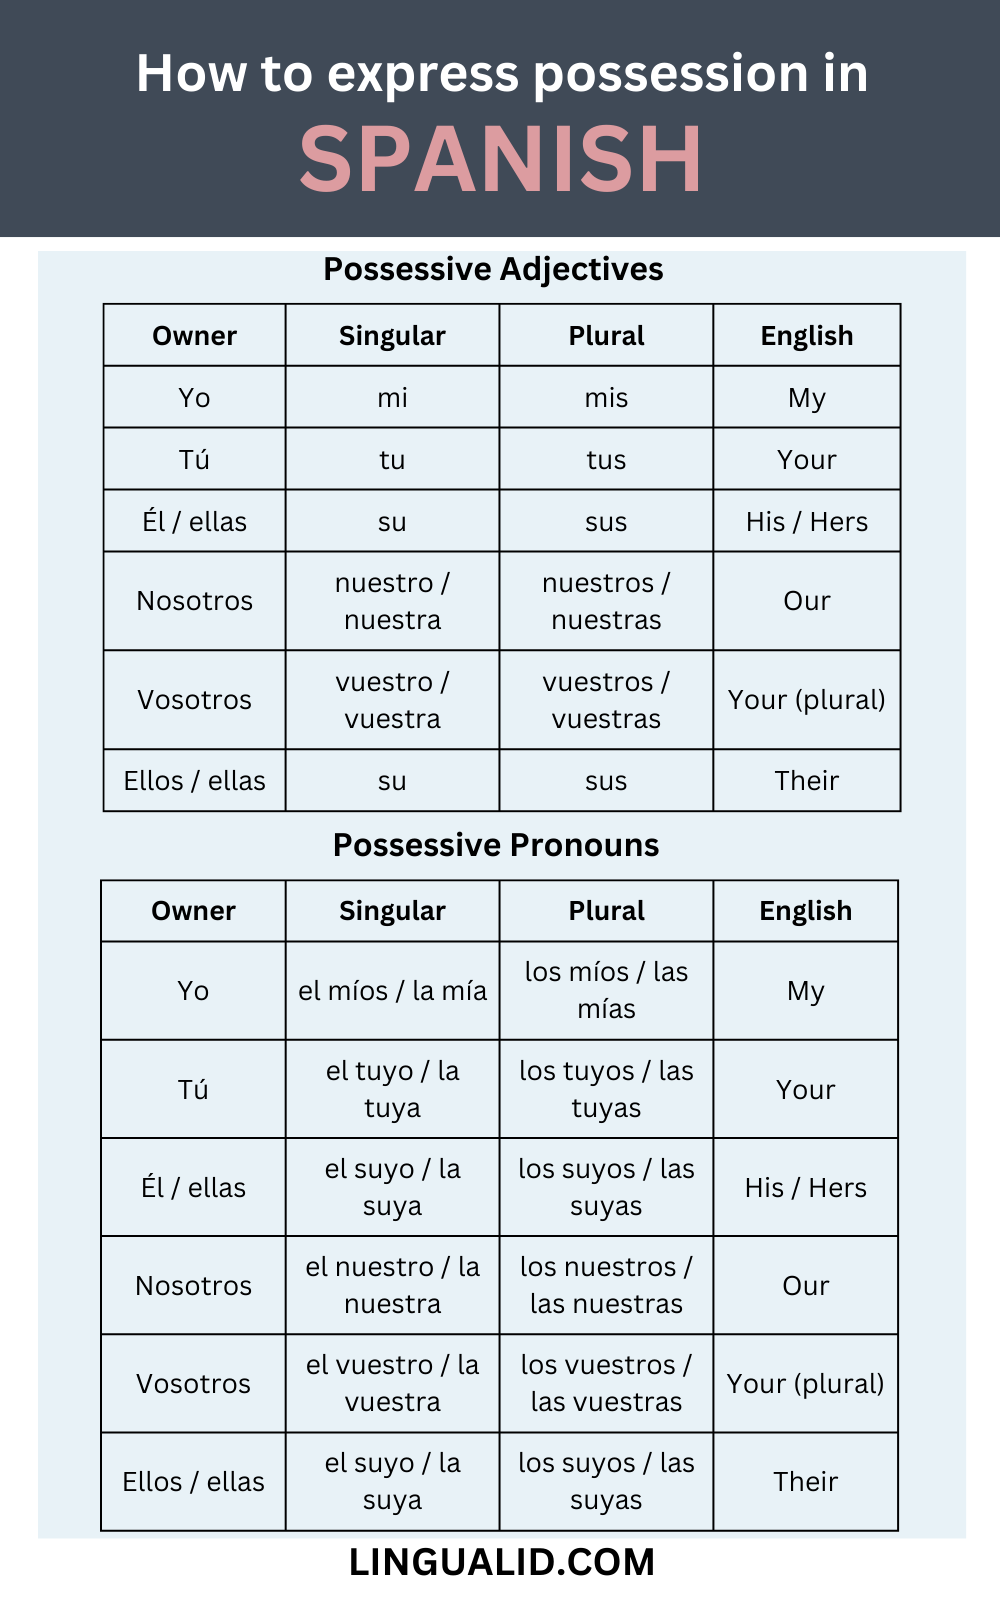 How to express possession in Spanish visual large